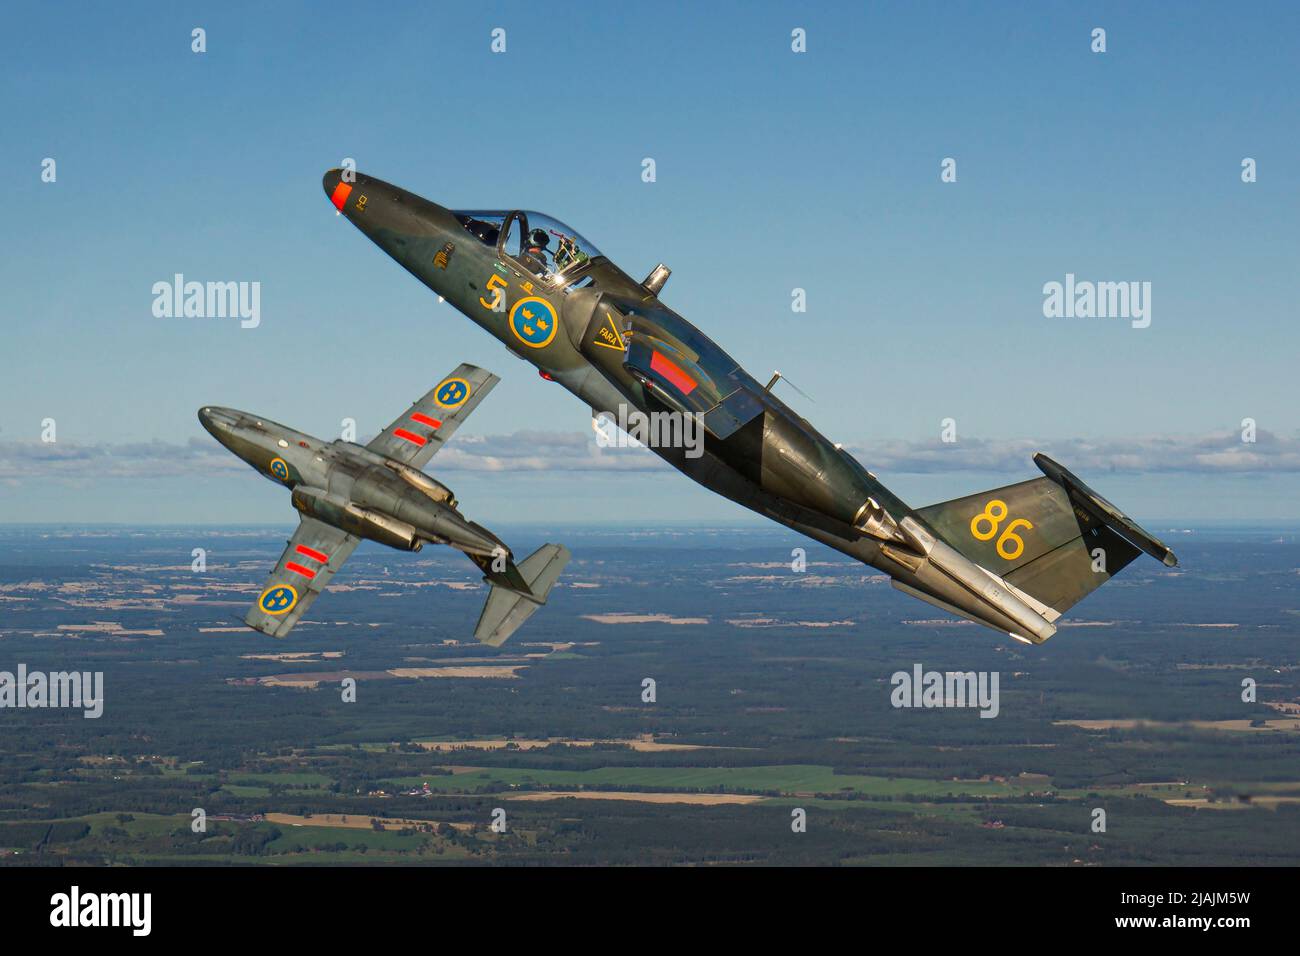 A pair of Swedish Air Force Sk60 training jets on a formation flight. Stock Photo